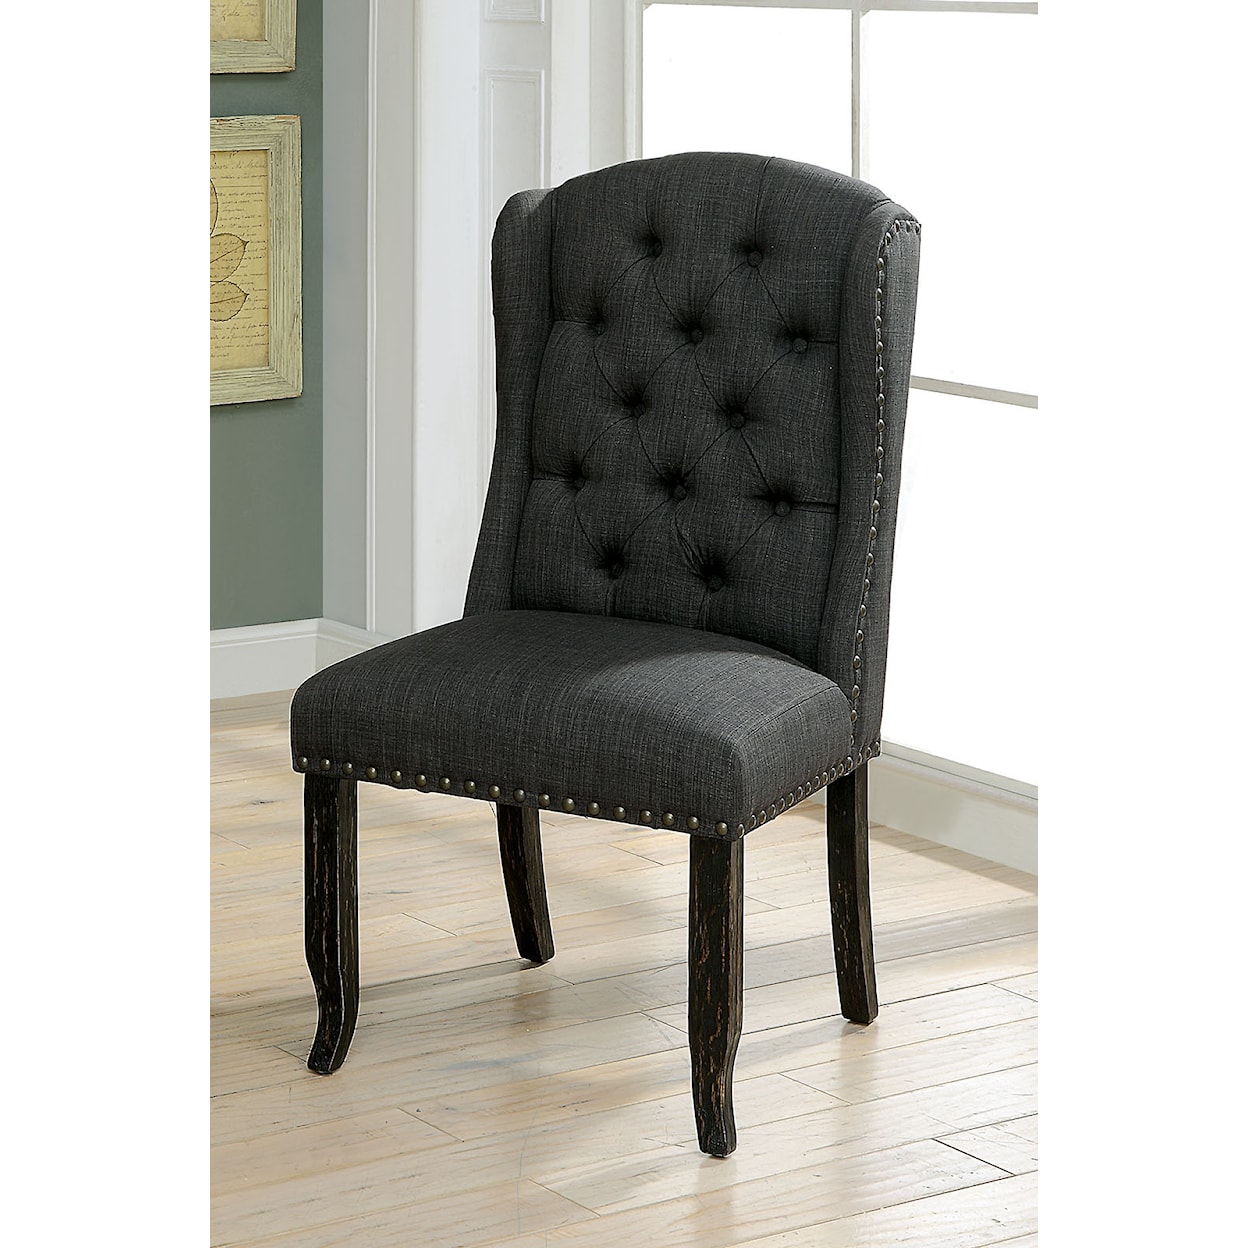 Furniture of America Sania Set of 2 Wing Back Chairs